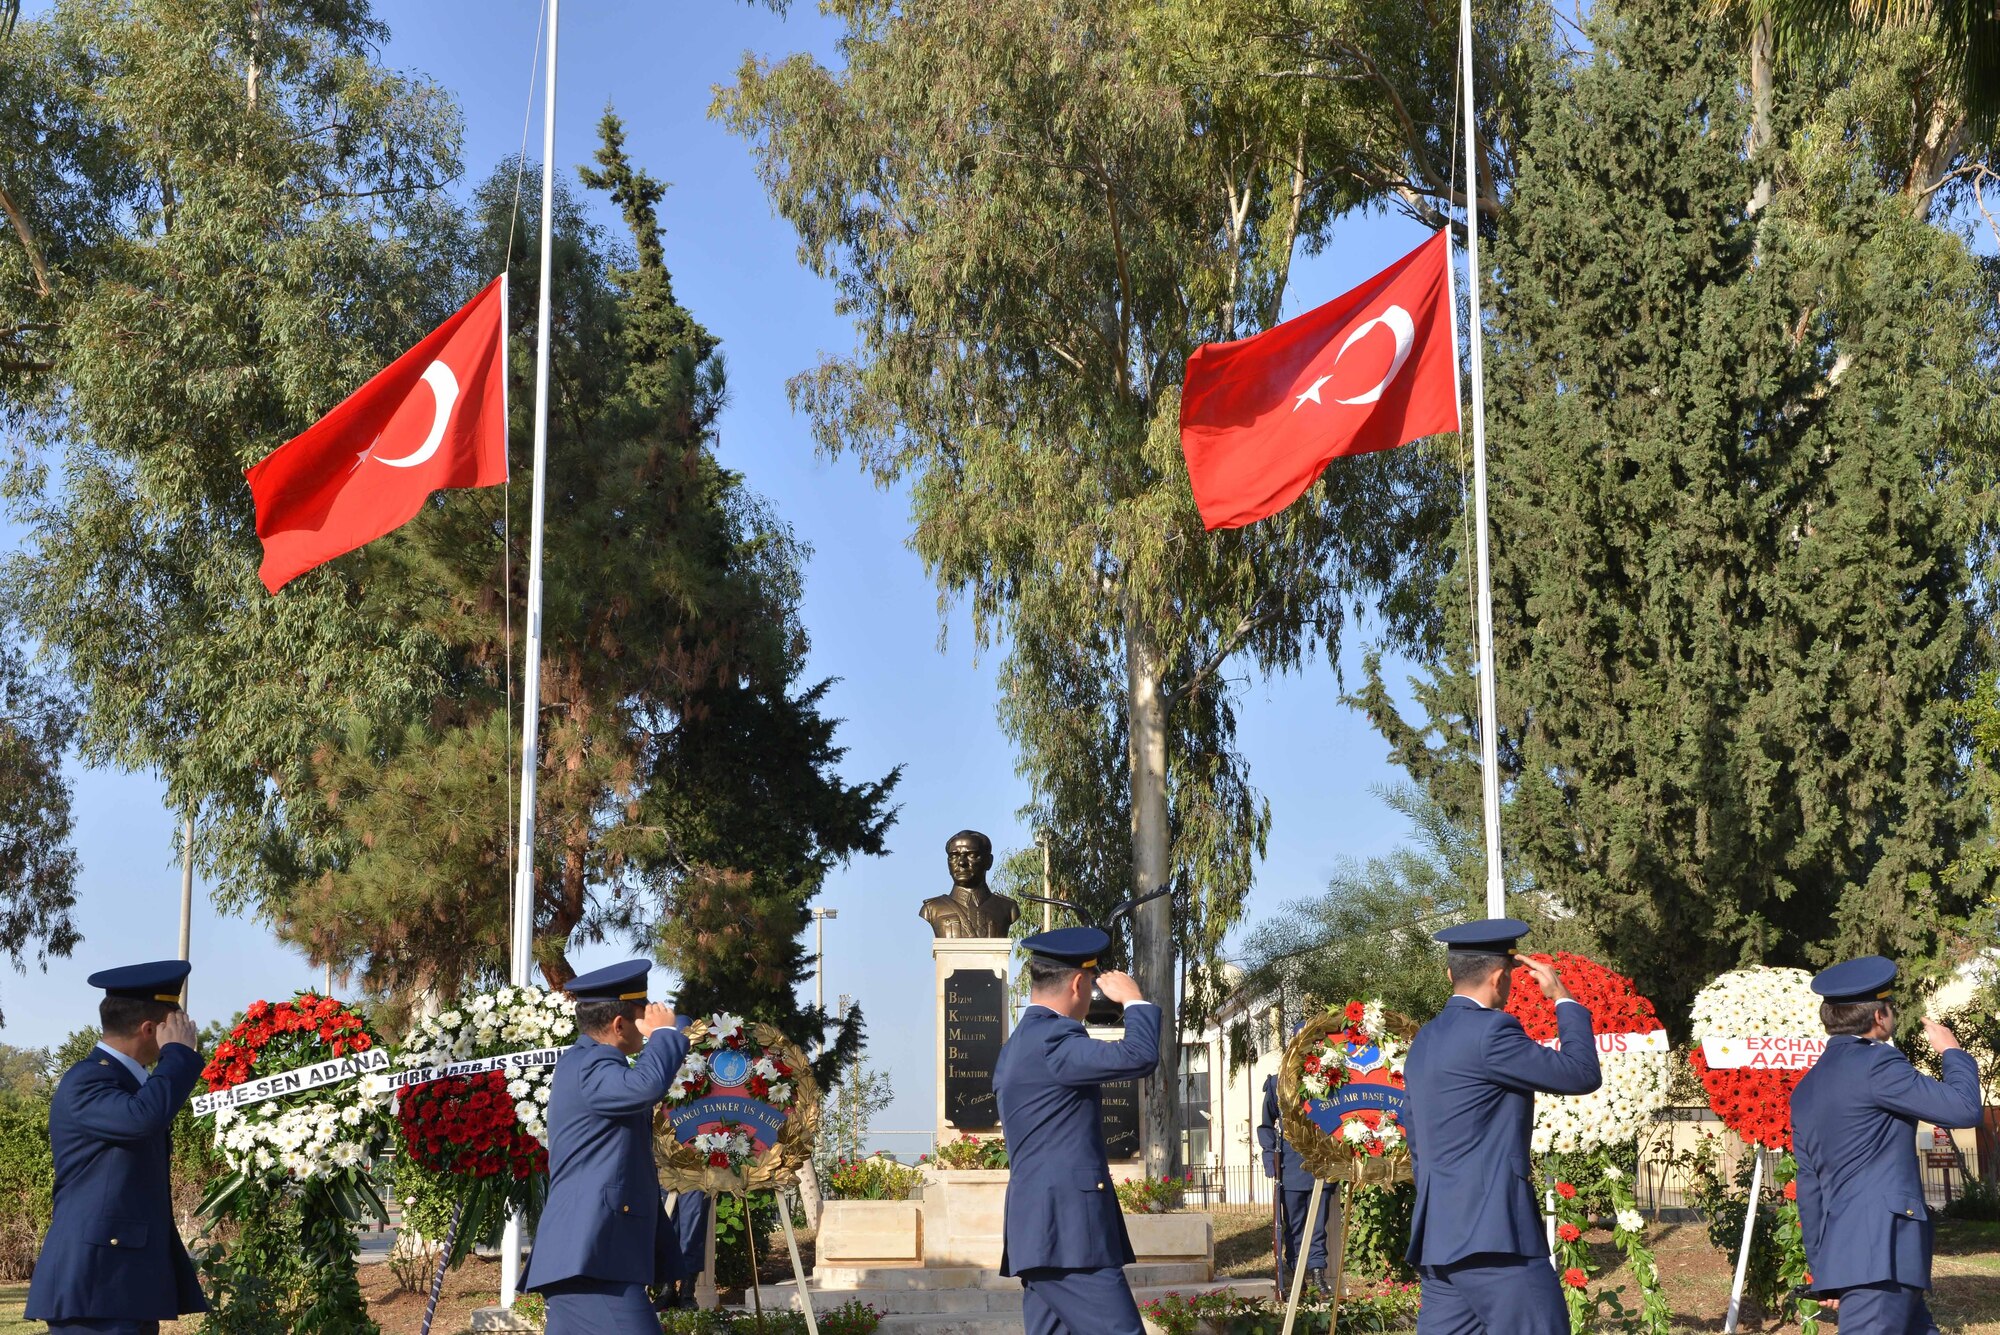 Turkish Air Force members assigned to the 10th Tanker Base salute as they pass a statue of Mustafa Kemal Ataturk during a memorial ceremony Nov. 10, 2016, at Incirlik Air Base, Turkey. Mustafa Kemal, in recognition of his efforts, was given the last name ‘Ataturk’, which means ‘father of Turks’. (U.S. Air Force photo by Senior Airman John Nieves Camacho)